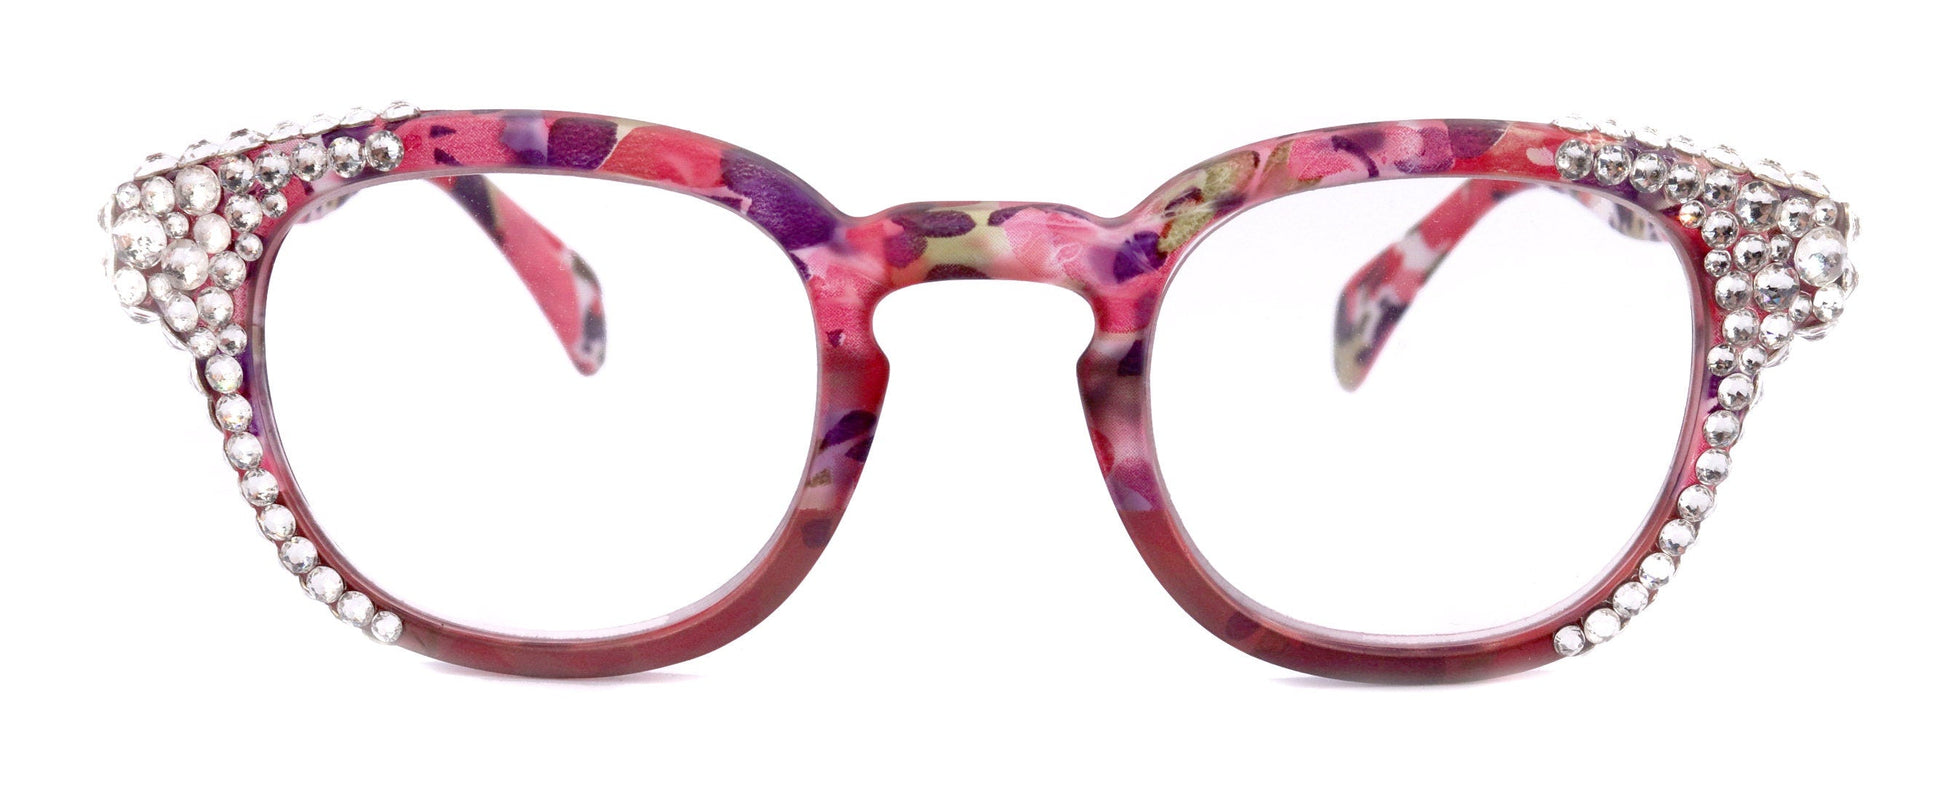 Autumn, (Bling) Reading Glasses For Women Adorned w (Clear) Genuine European Crystals,  Round Frame (Pink, Purple Floral) NY Fifth Avenue 